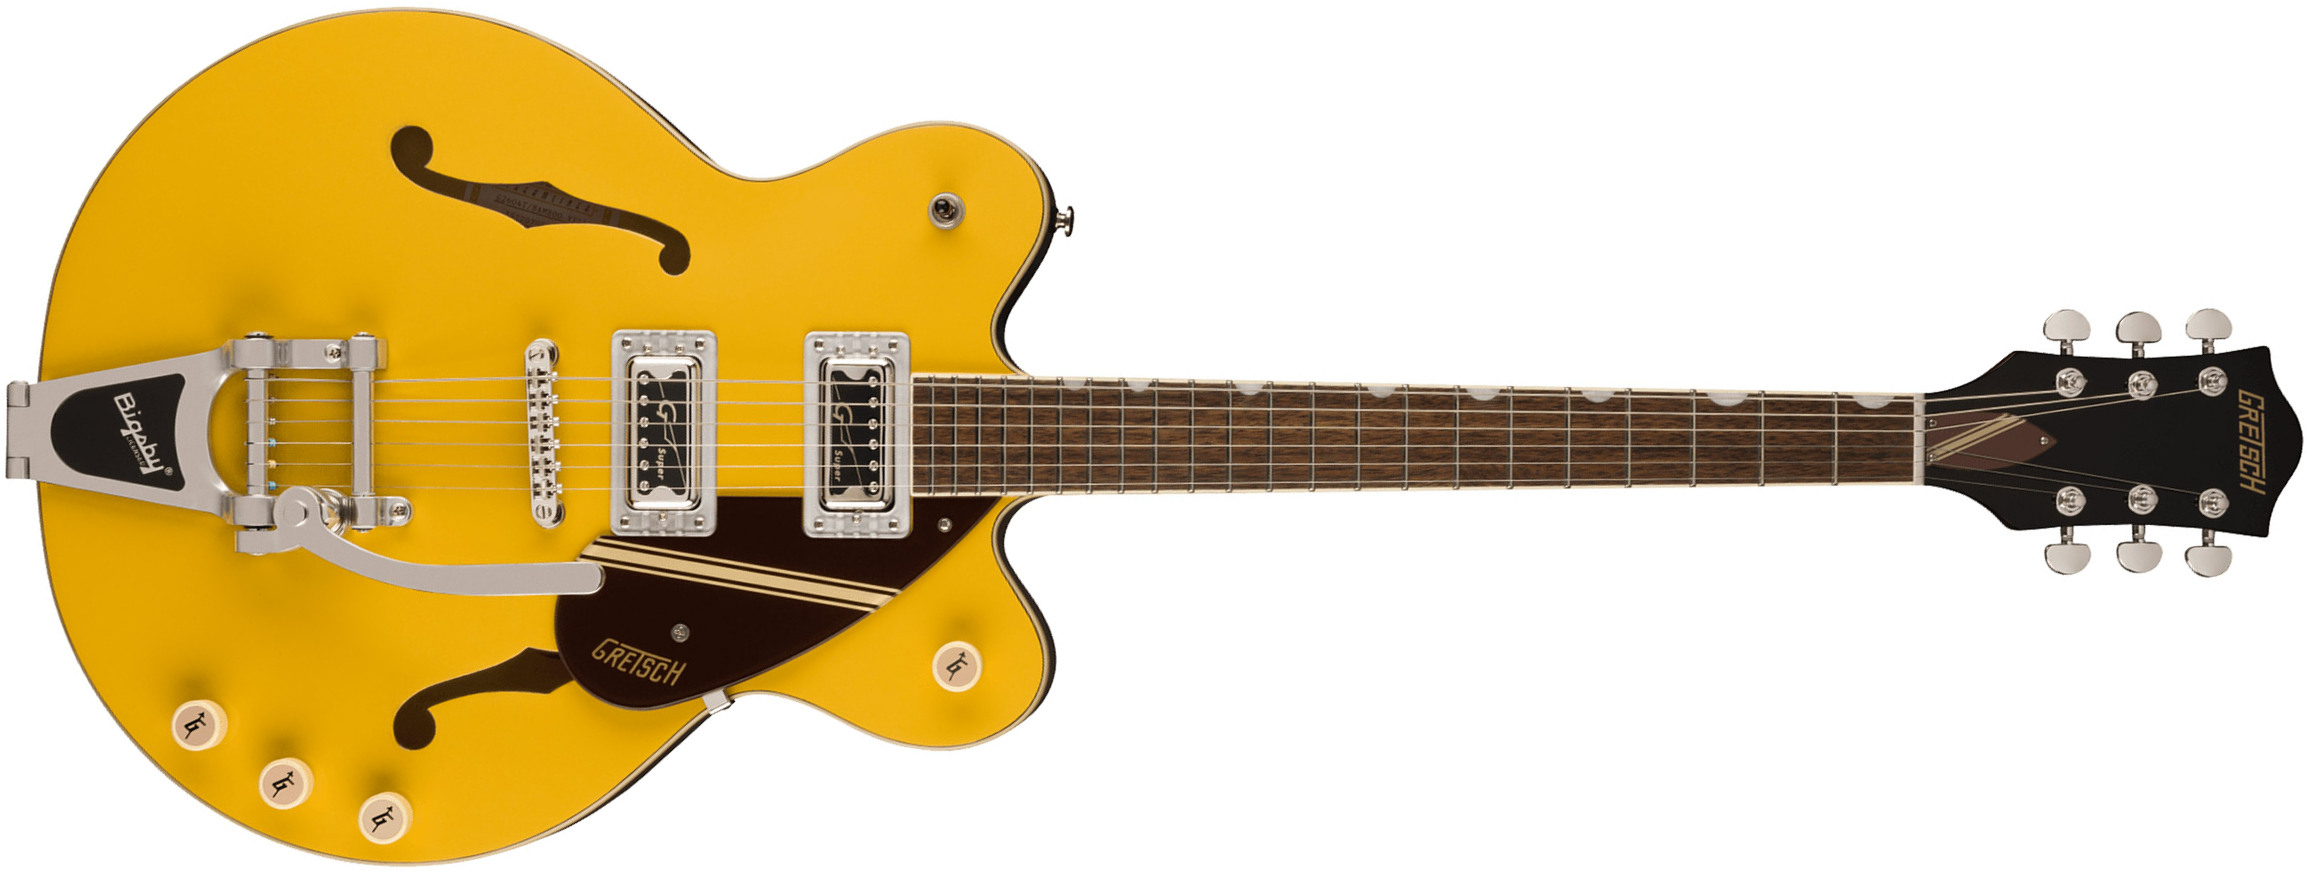 Gretsch G2604t Streamliner Rally Ii Center Block Dc Bigsby 2h Trem Lau - 2-tone Bamboo Yellow/copper Metallic - Guitare Électrique 1/2 Caisse - Main p